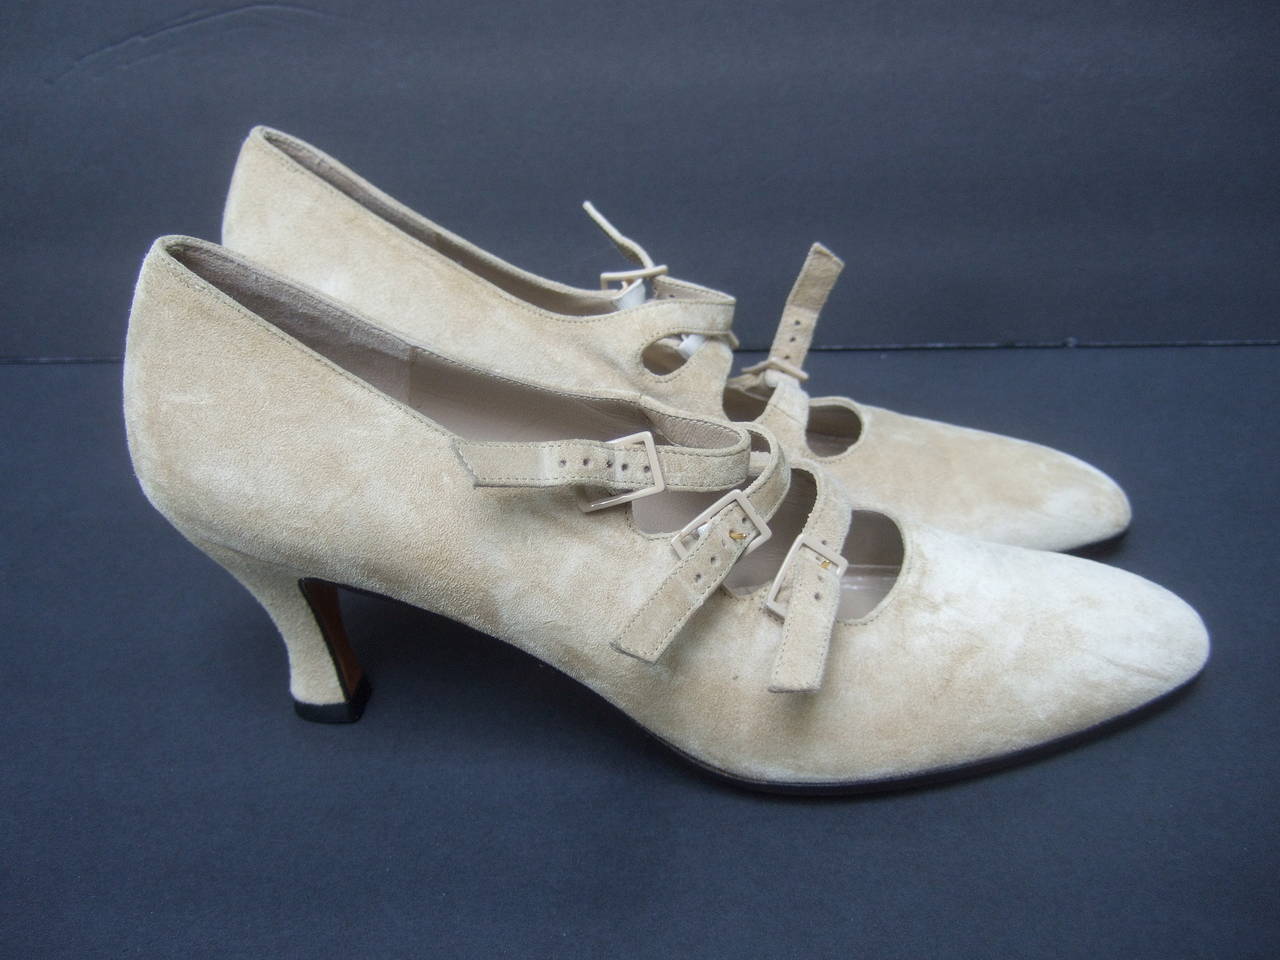 Salvatore Ferragamo Tan suede buckle strap pumps New Size 9 1/2 AAAAA
The Italian suede shoes are designed with three suede buckle
straps on each shoe

The designer suede shoes are new in unworn condition 
The interior is tan leather and suede.